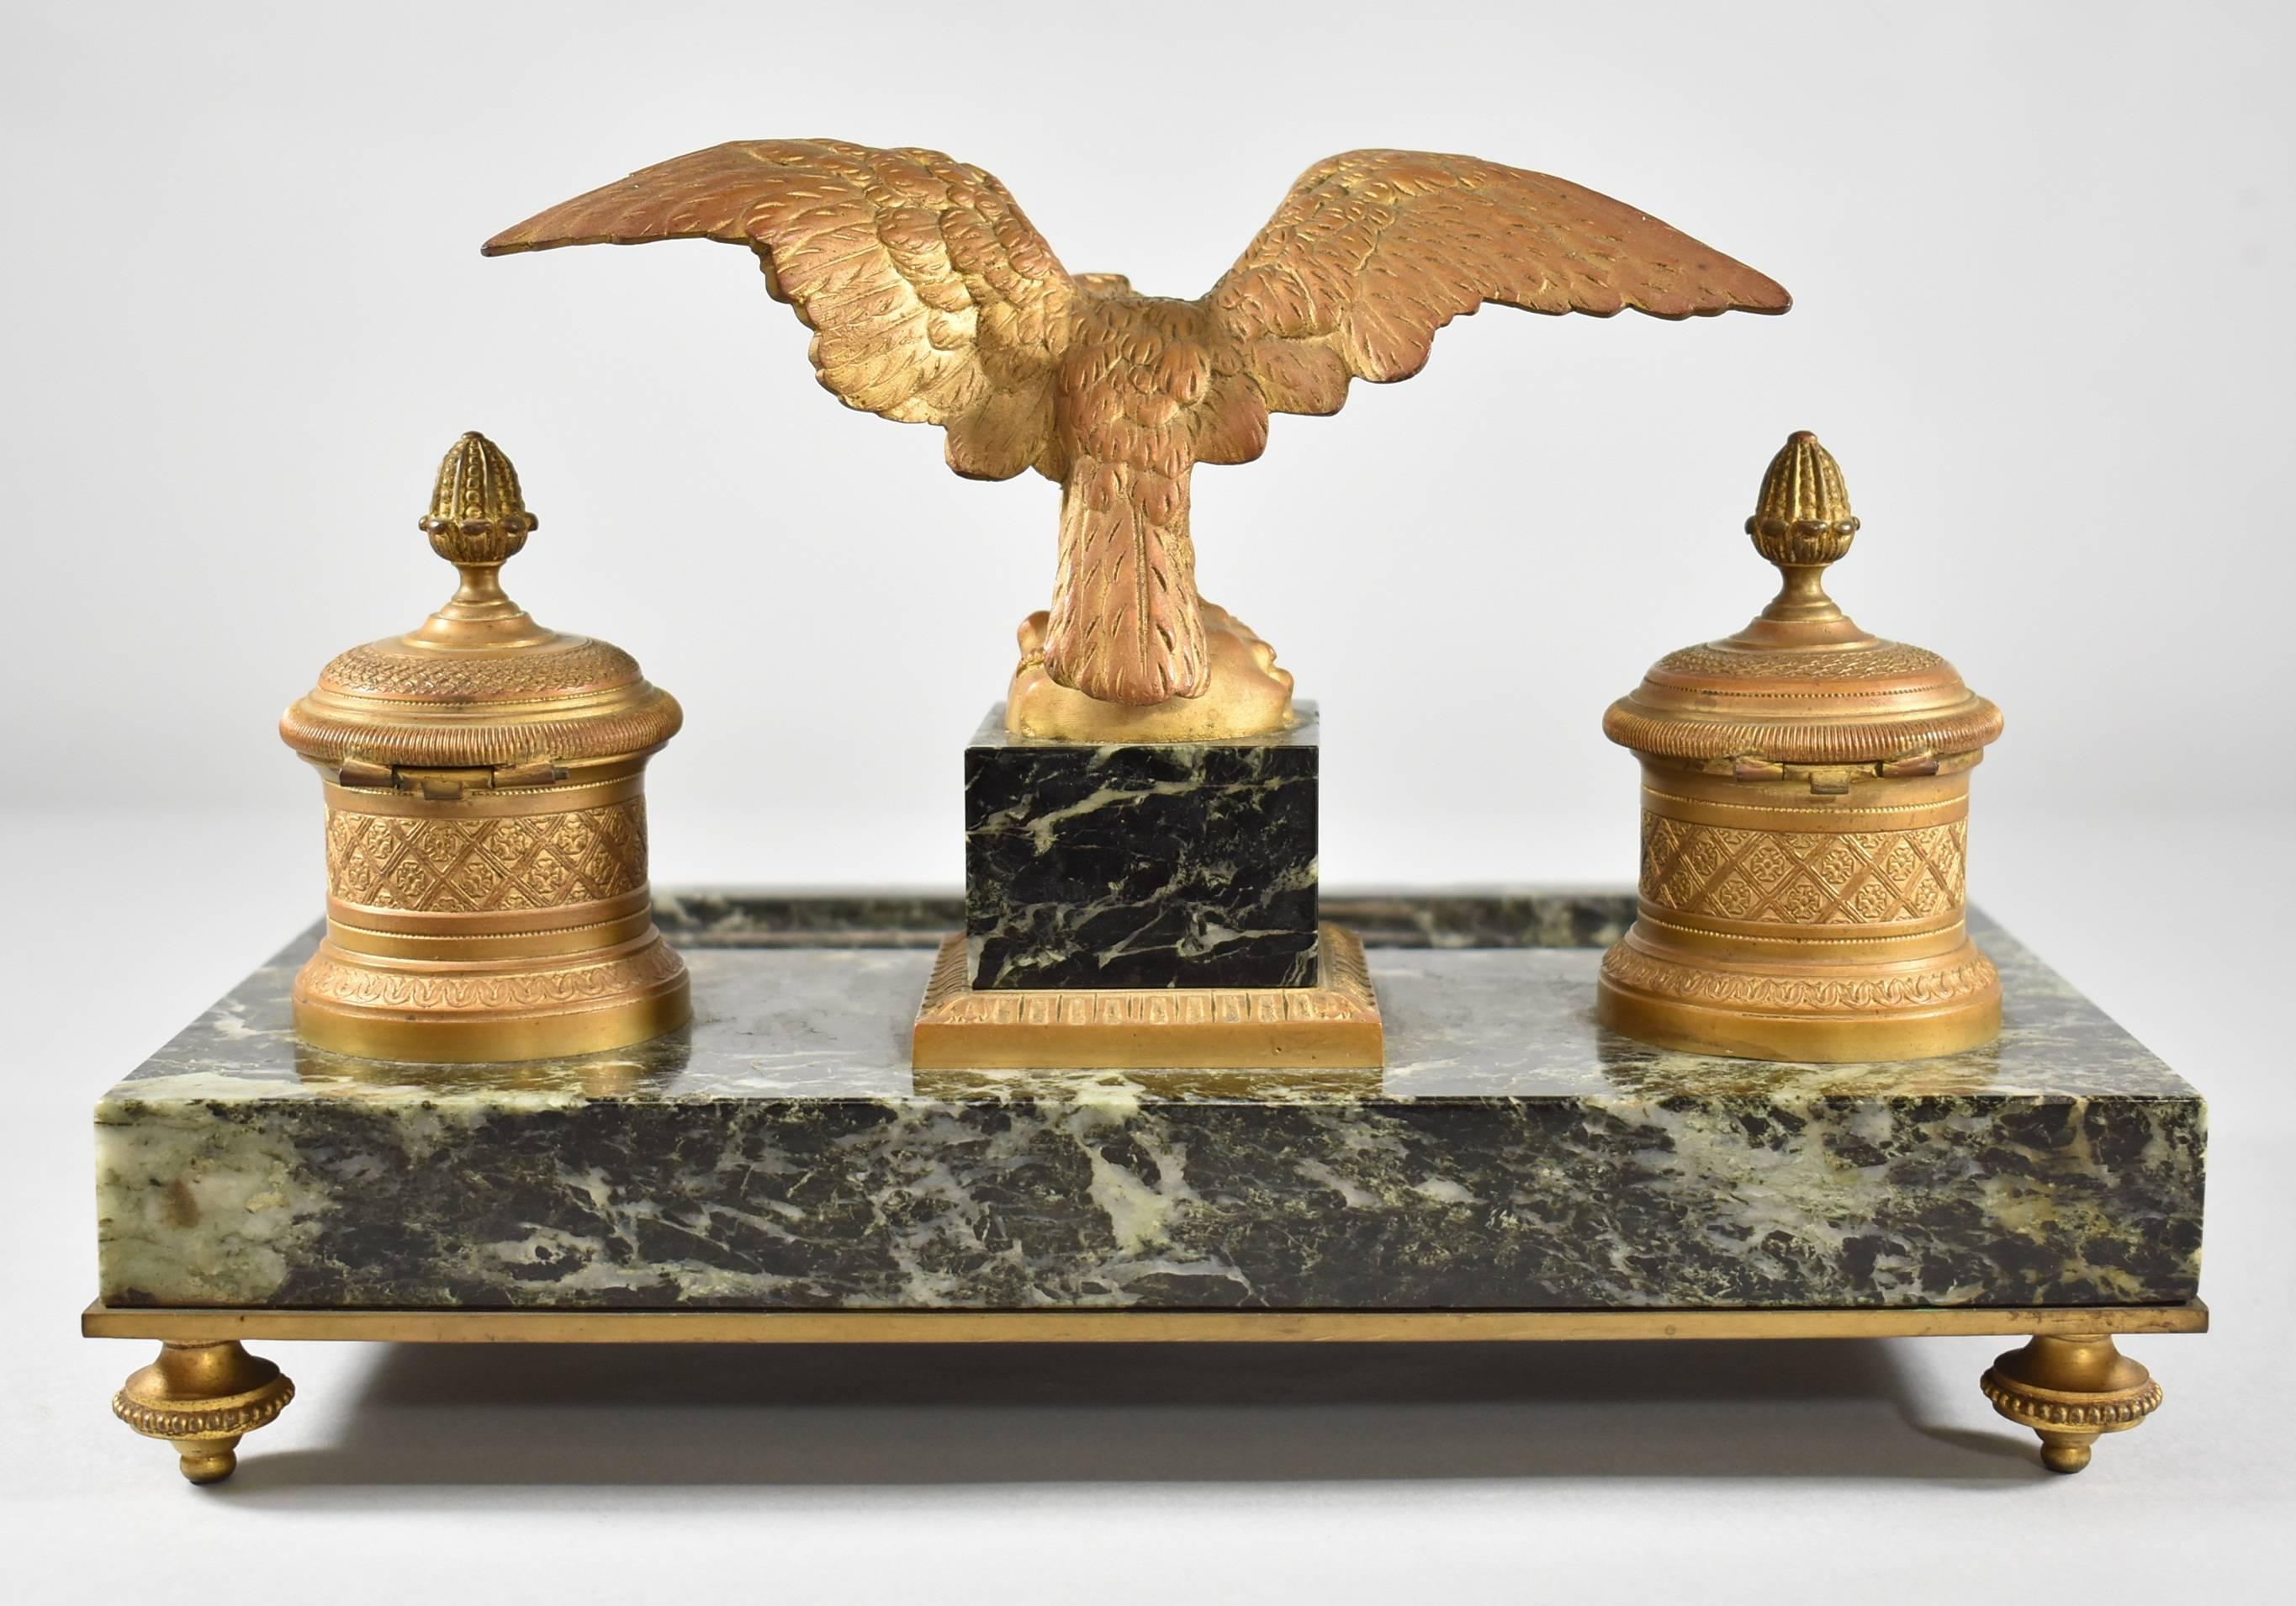 A large 19th century French gilt bronze and marble inkwell. Featured are an eagle perched atop a central plinth with outspread wings flanked by two bronze covered inkwells with glass inserts. Bronze mounts adorn the plinth and the front of the